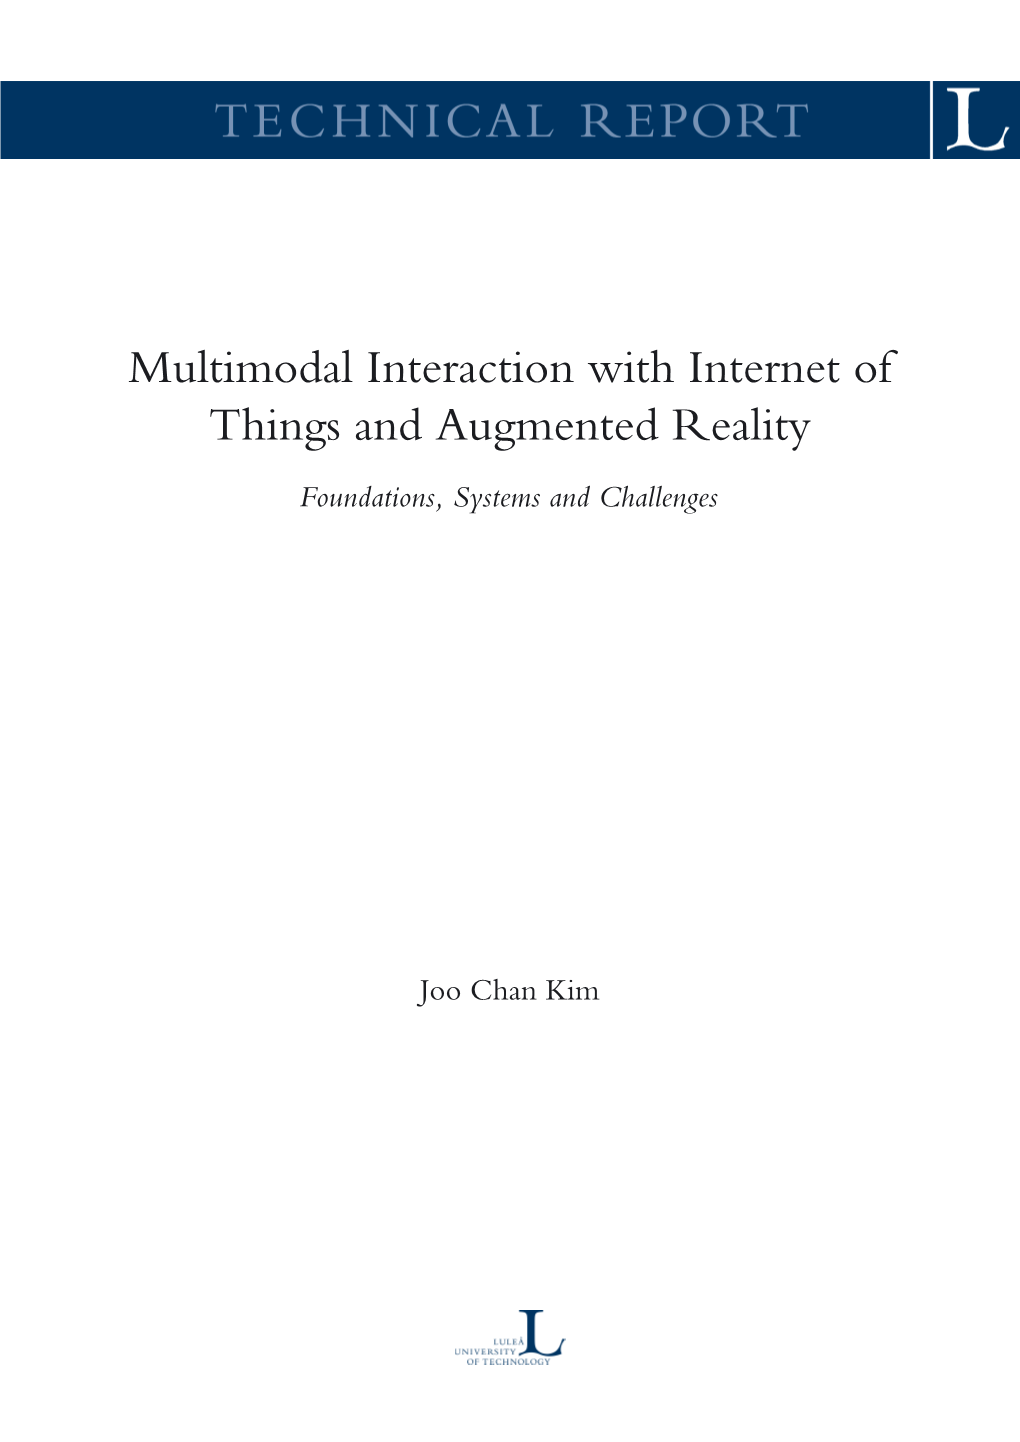 Multimodal Interaction with Internet of Things and Augmented Reality